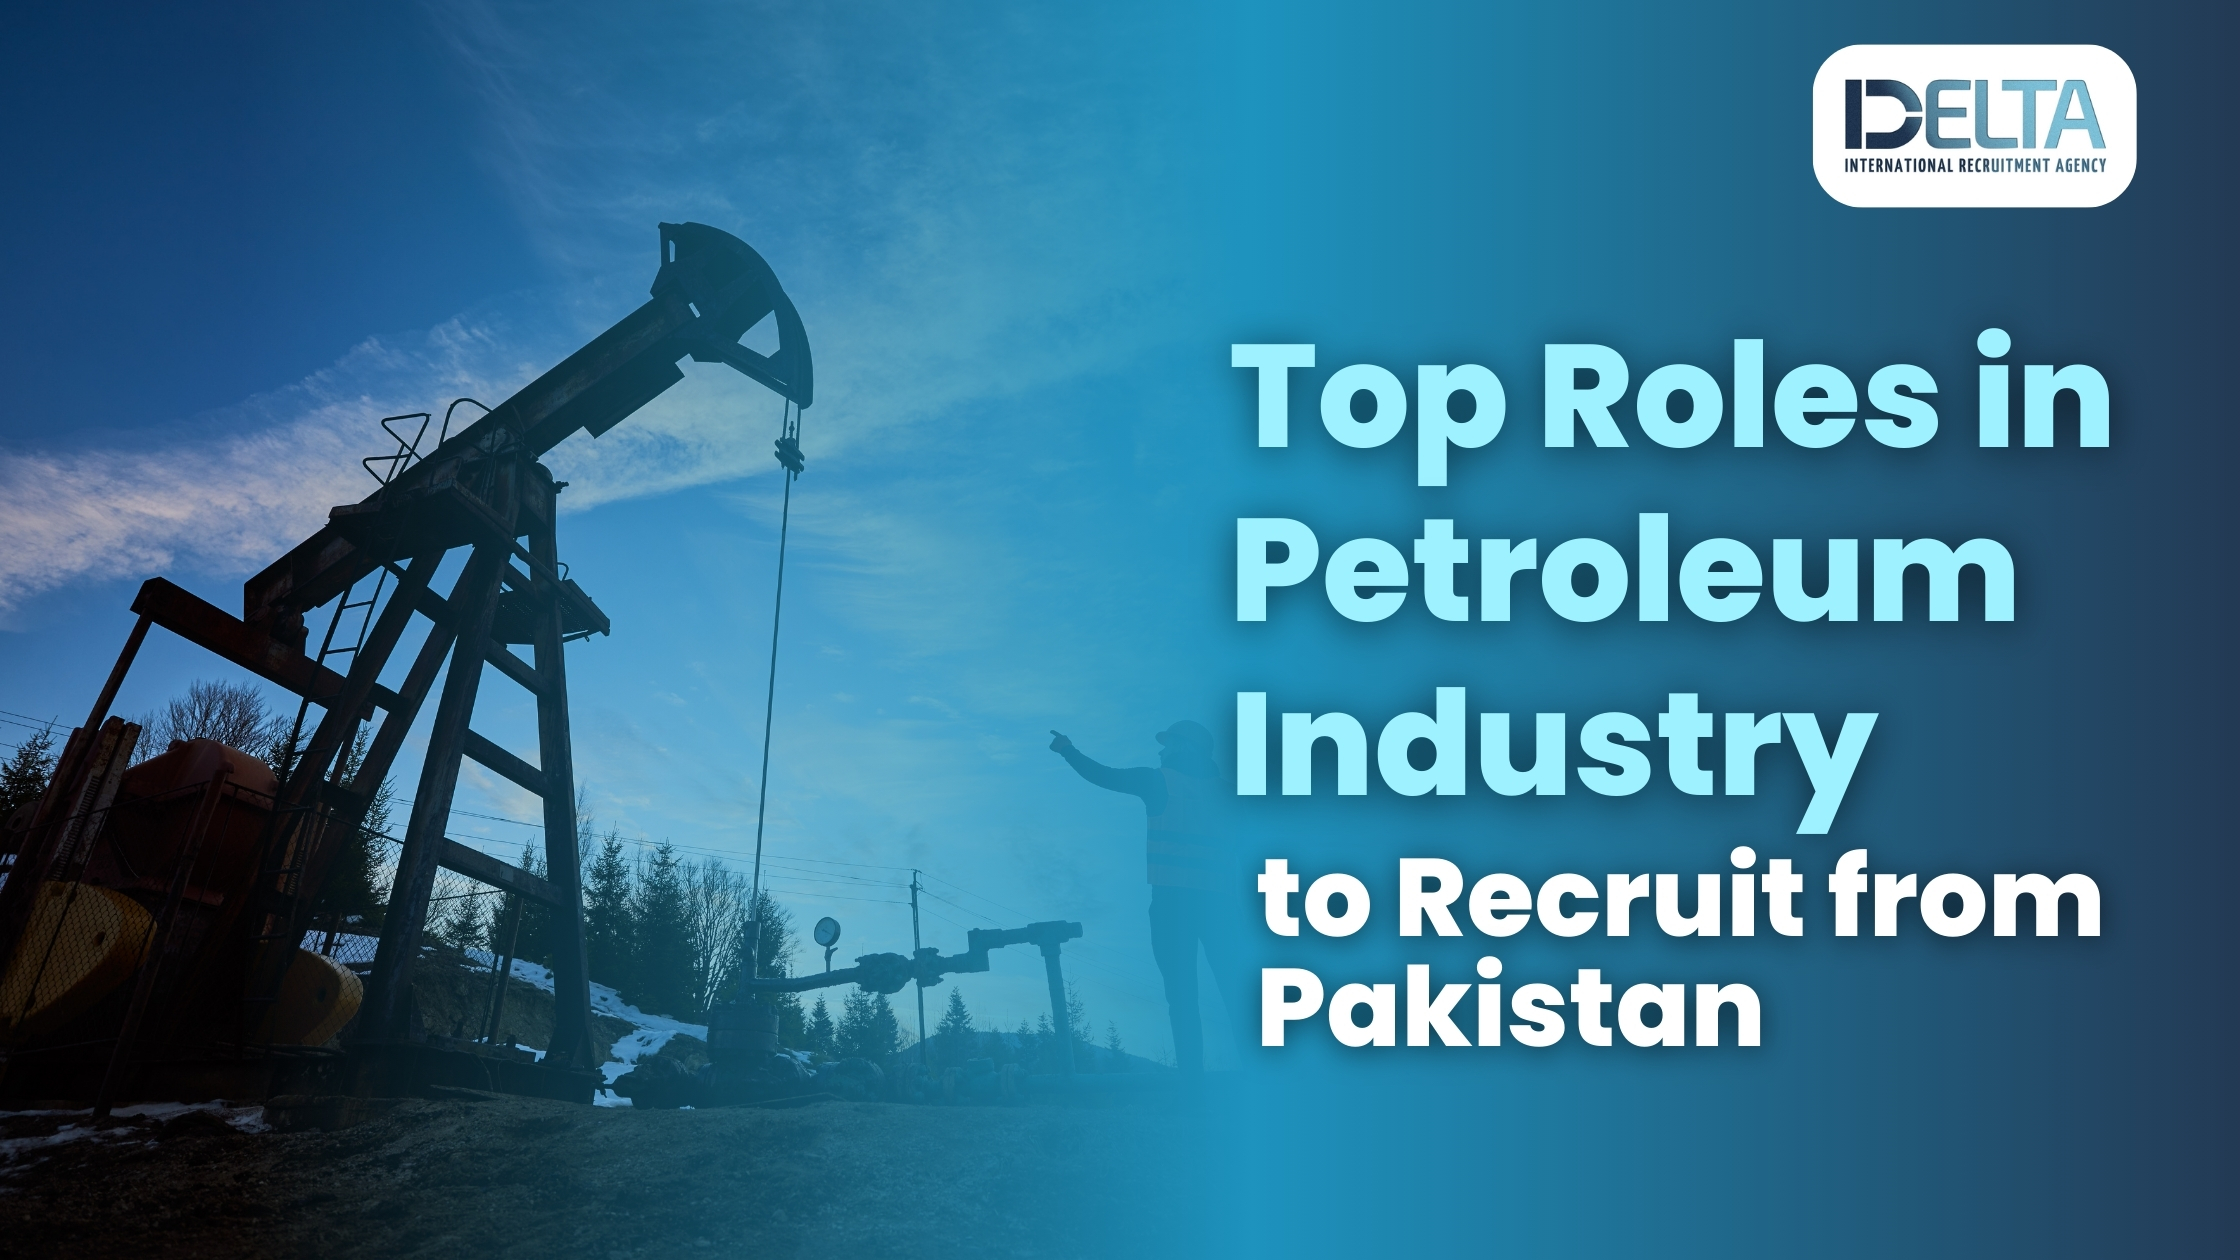 Top Roles in Petroleum Industry to Recruit from Pakistan